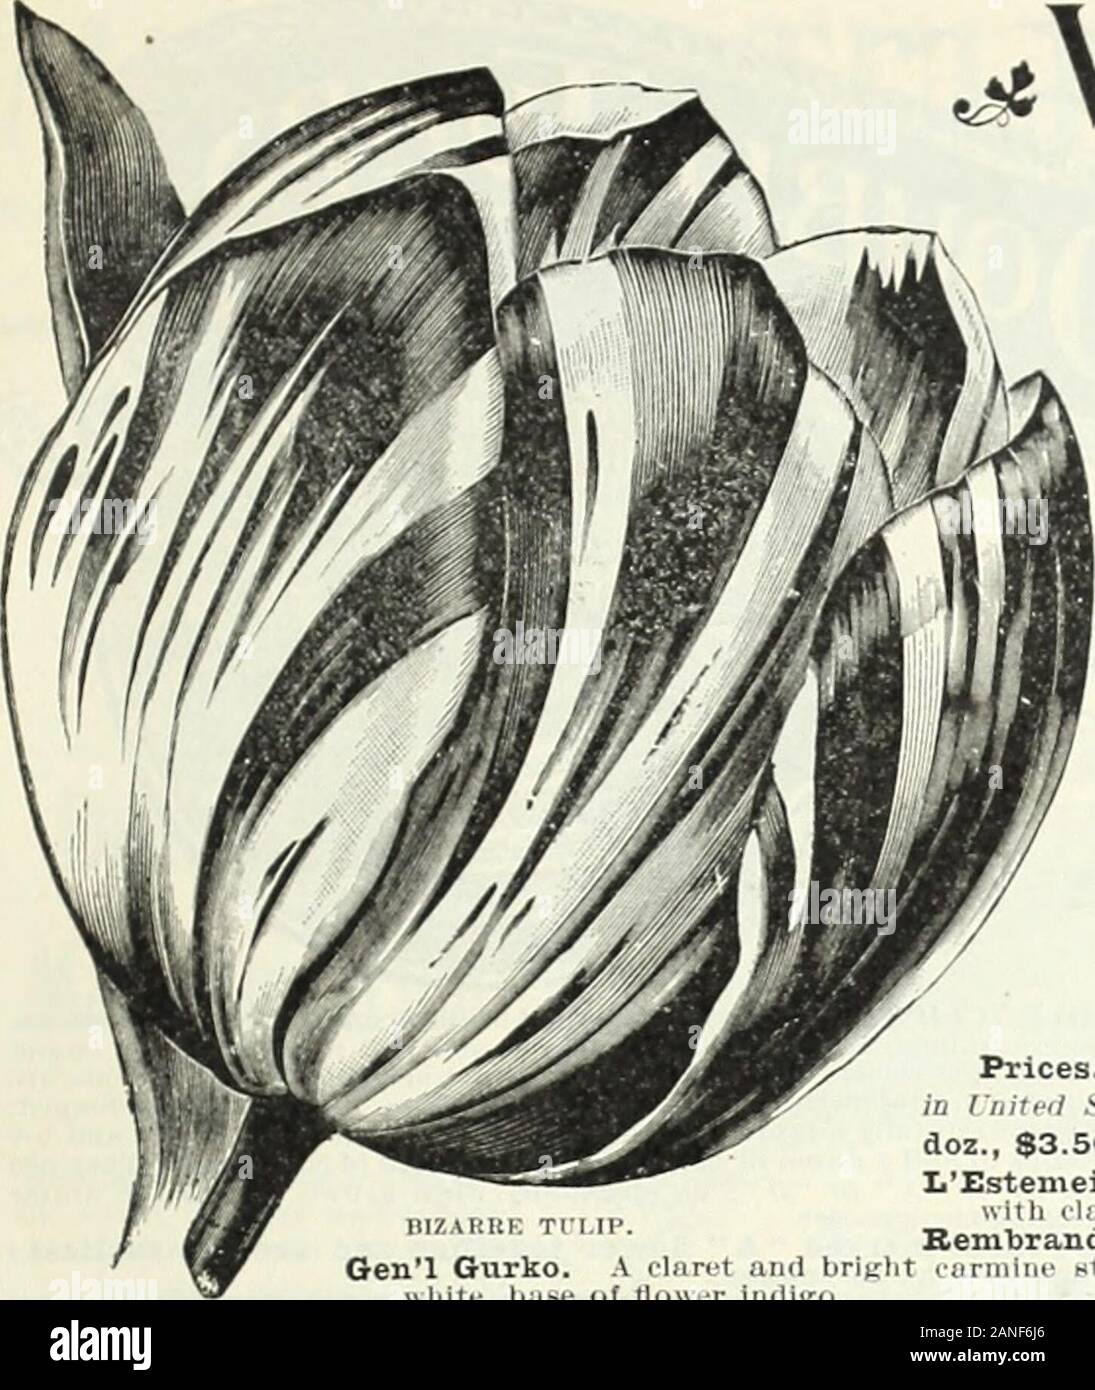 Autumn bulb catalogue : 1900 . ne slijipc Maidens Blush, .clegant loug-shniHNl.clear white flower: the iwtnls. which arepolnlcil (inil i-lcgnntl.v refle.ved. are bcau-ltiluUv miirglnednnd penciled on theedpt*withbright pink ! Elegans. . grand Tulip, ver.v showy, rlclil(ri:nsnns(jrlct. large tlower. pointed petals White Swan. A grand pure white Inte-lloHcrlng Tnllp : just what is wanted forrontrasling with flie n-ils. vellows andpurples, which In n-toforo pndondnntcd Inlate Tulips. •• White Sw;in grows about12 Inches high, n strong liiMltliy grower,with broad leaves; the floHcrs are extra!Inr Stock Photo